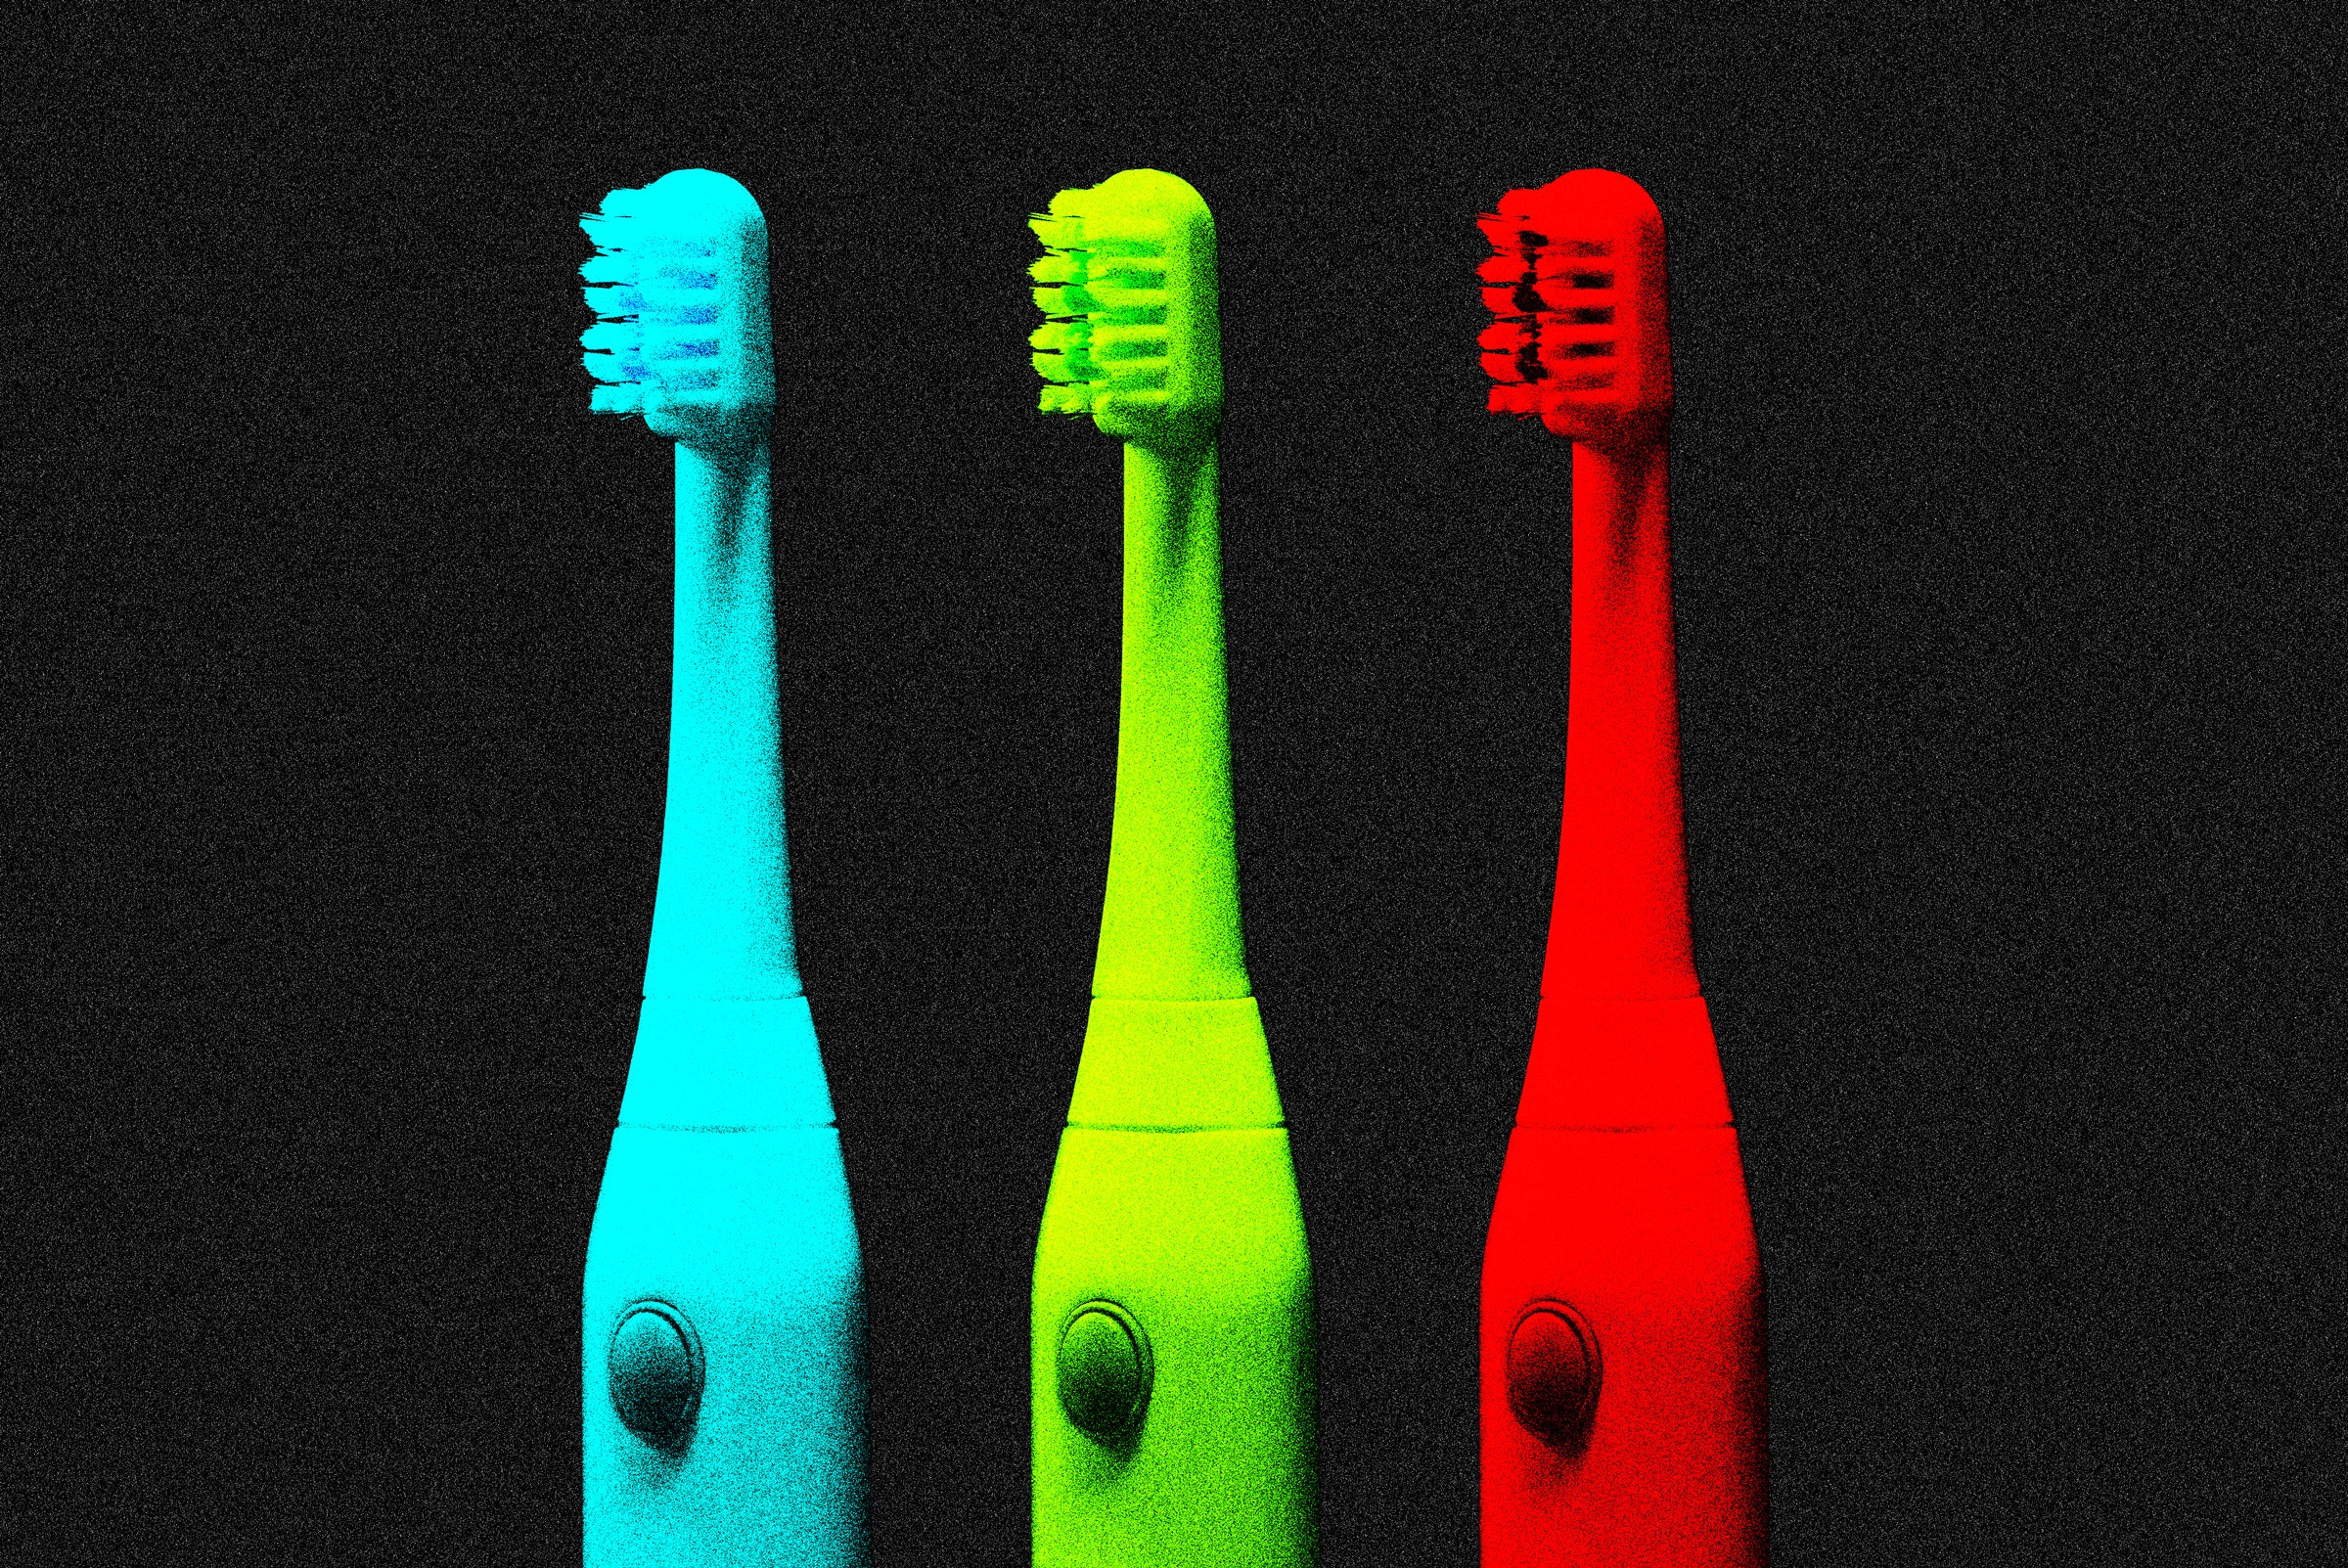 The Hacked Toothbrushes: A Cyber Urban Legend